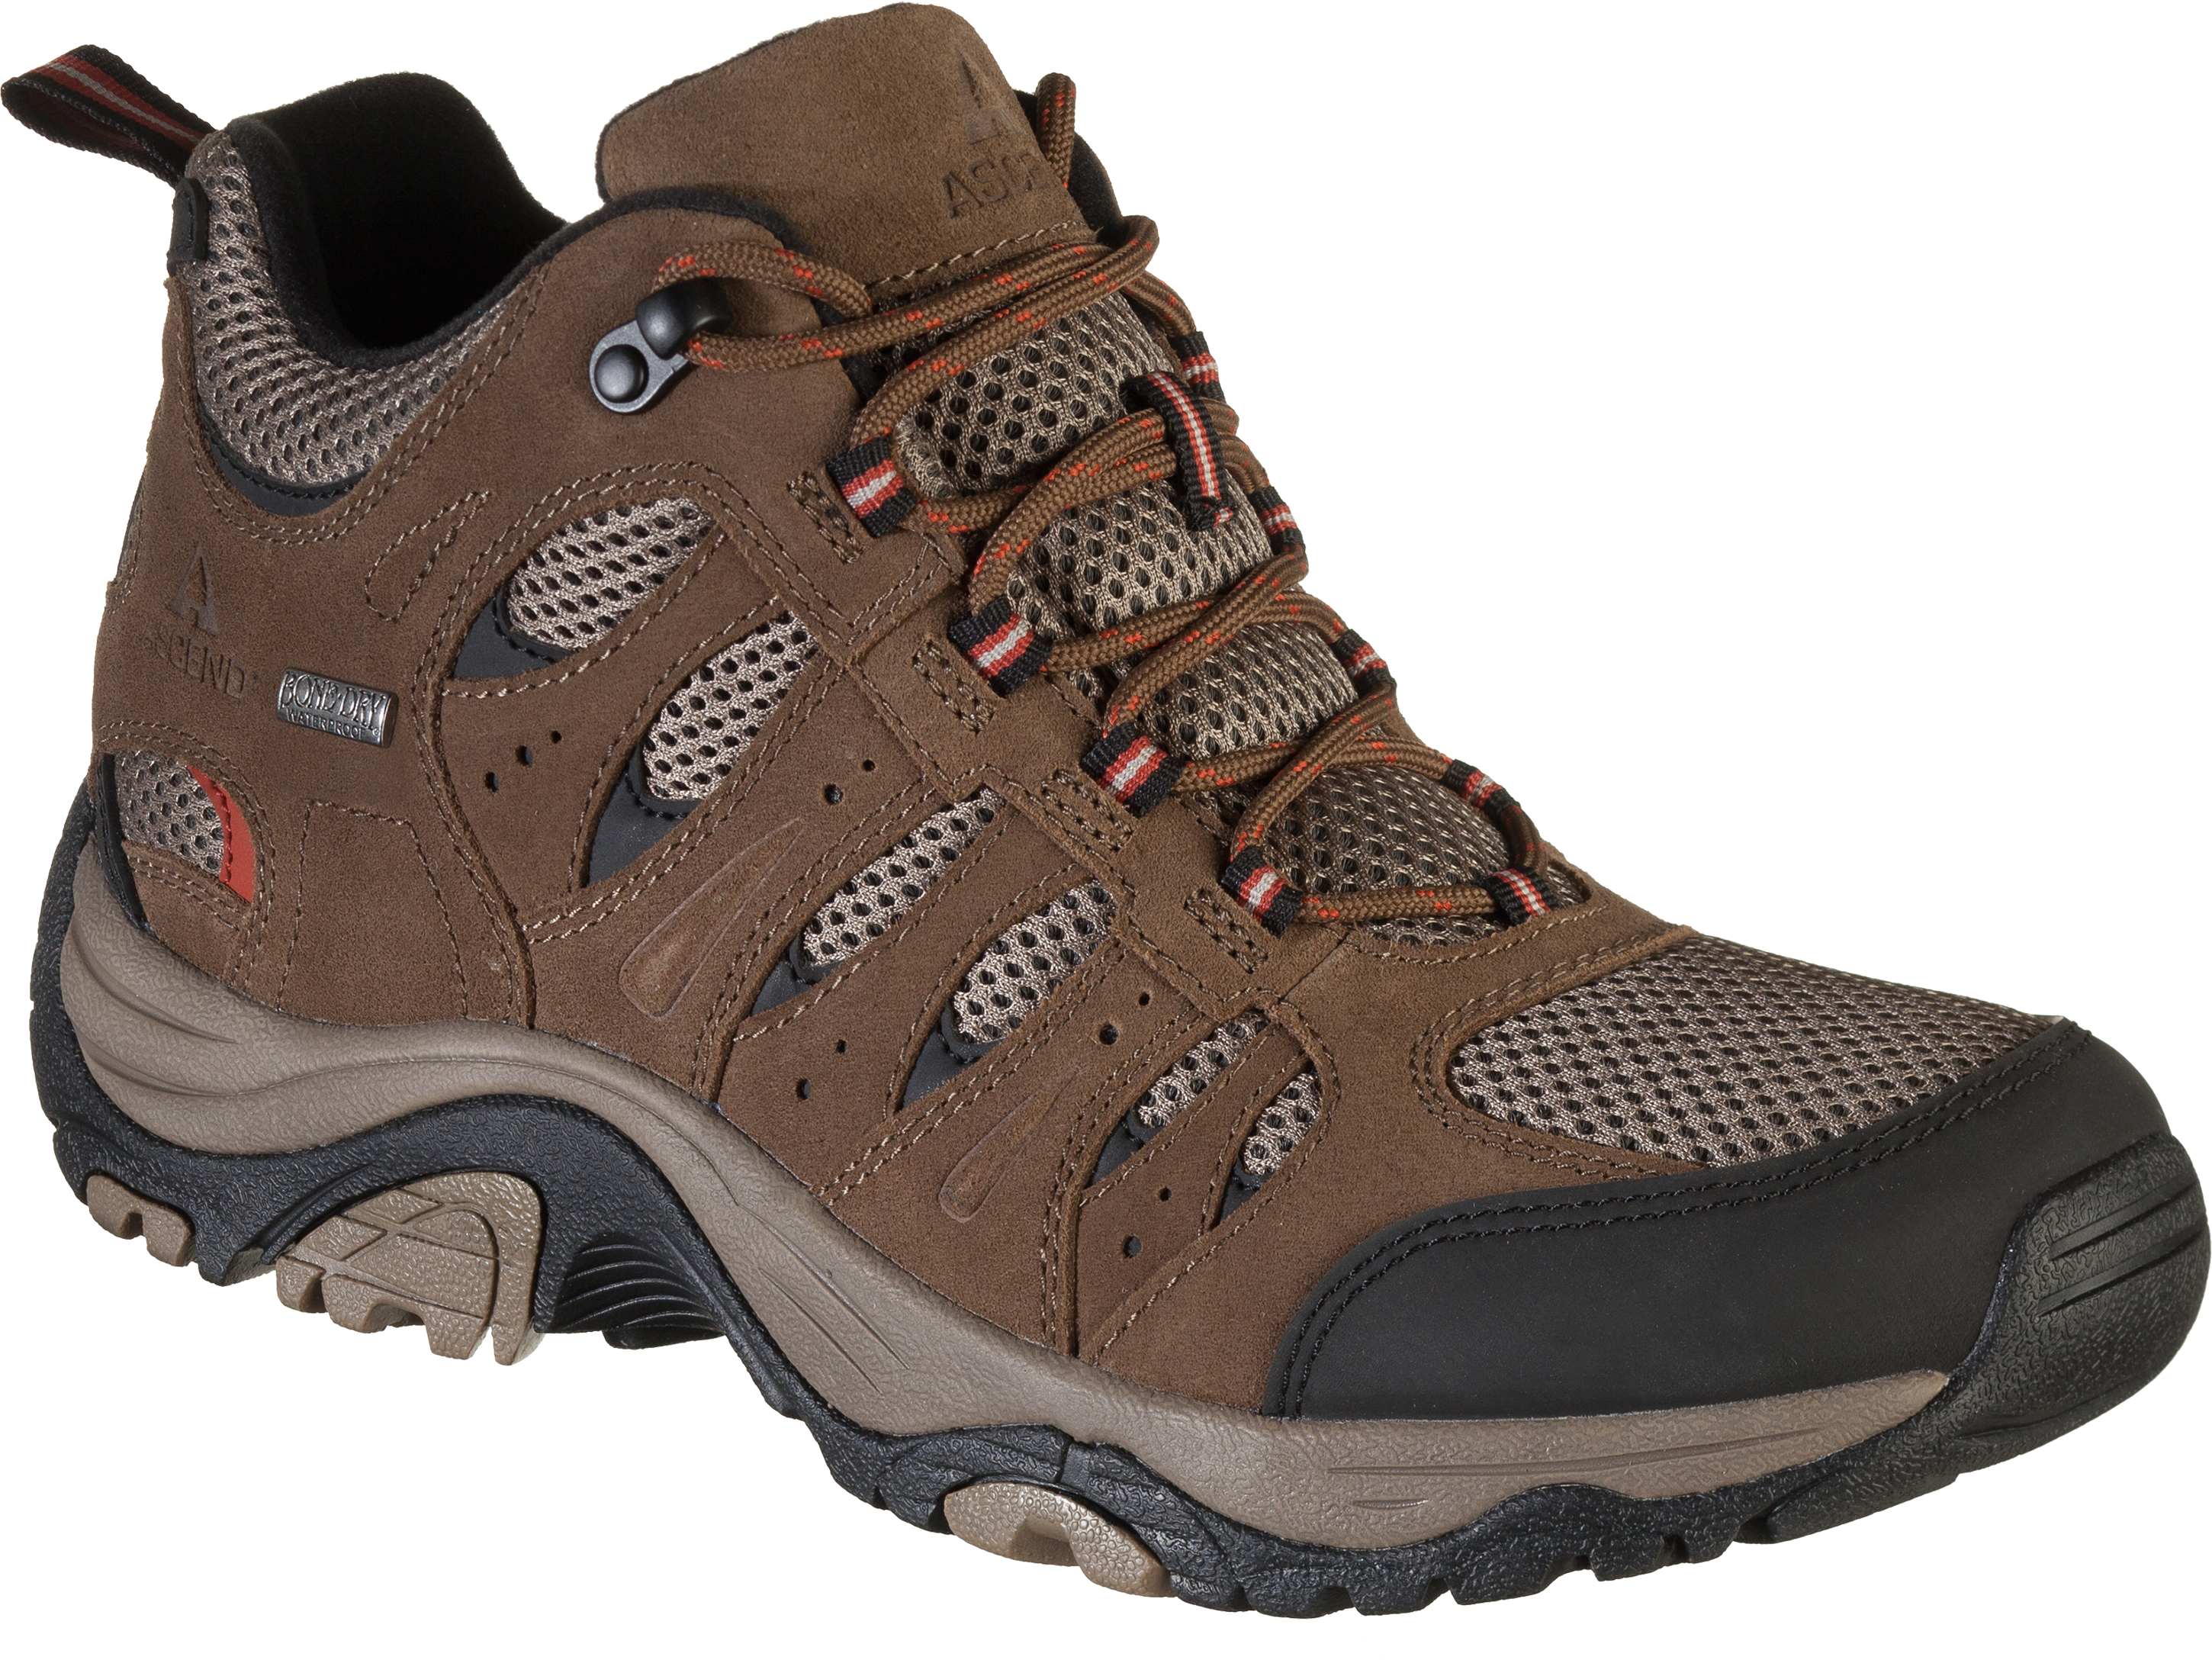 Ascend Lisco Mid Waterproof Hiking Boots for Men - Chocolate - 10.5M